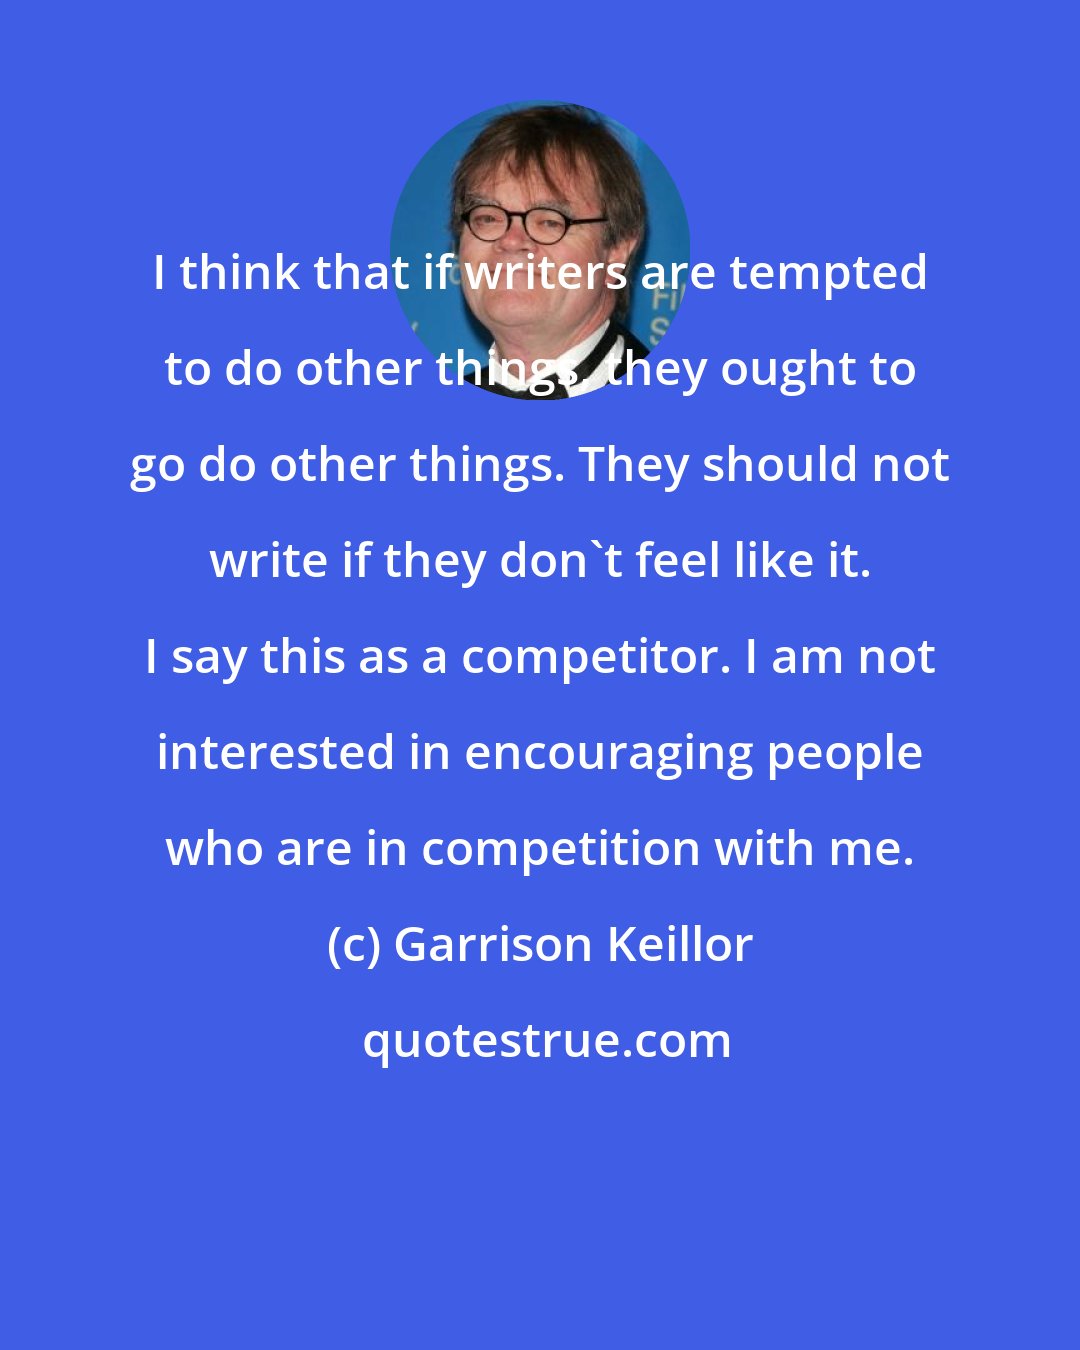 Garrison Keillor: I think that if writers are tempted to do other things, they ought to go do other things. They should not write if they don't feel like it. I say this as a competitor. I am not interested in encouraging people who are in competition with me.